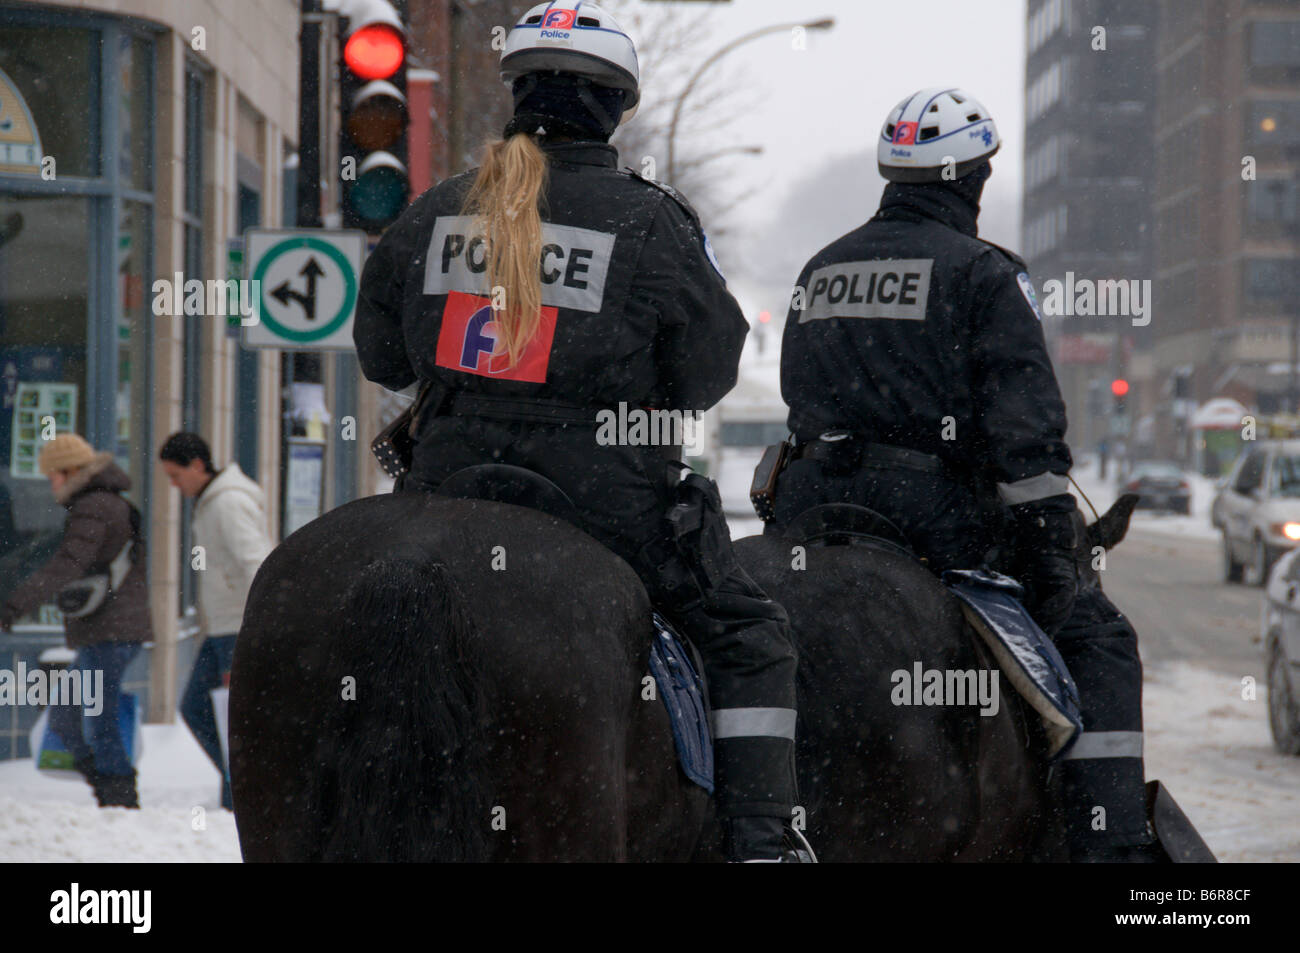 Police officers patrolling on horses in Montreal Canada Stock Photo